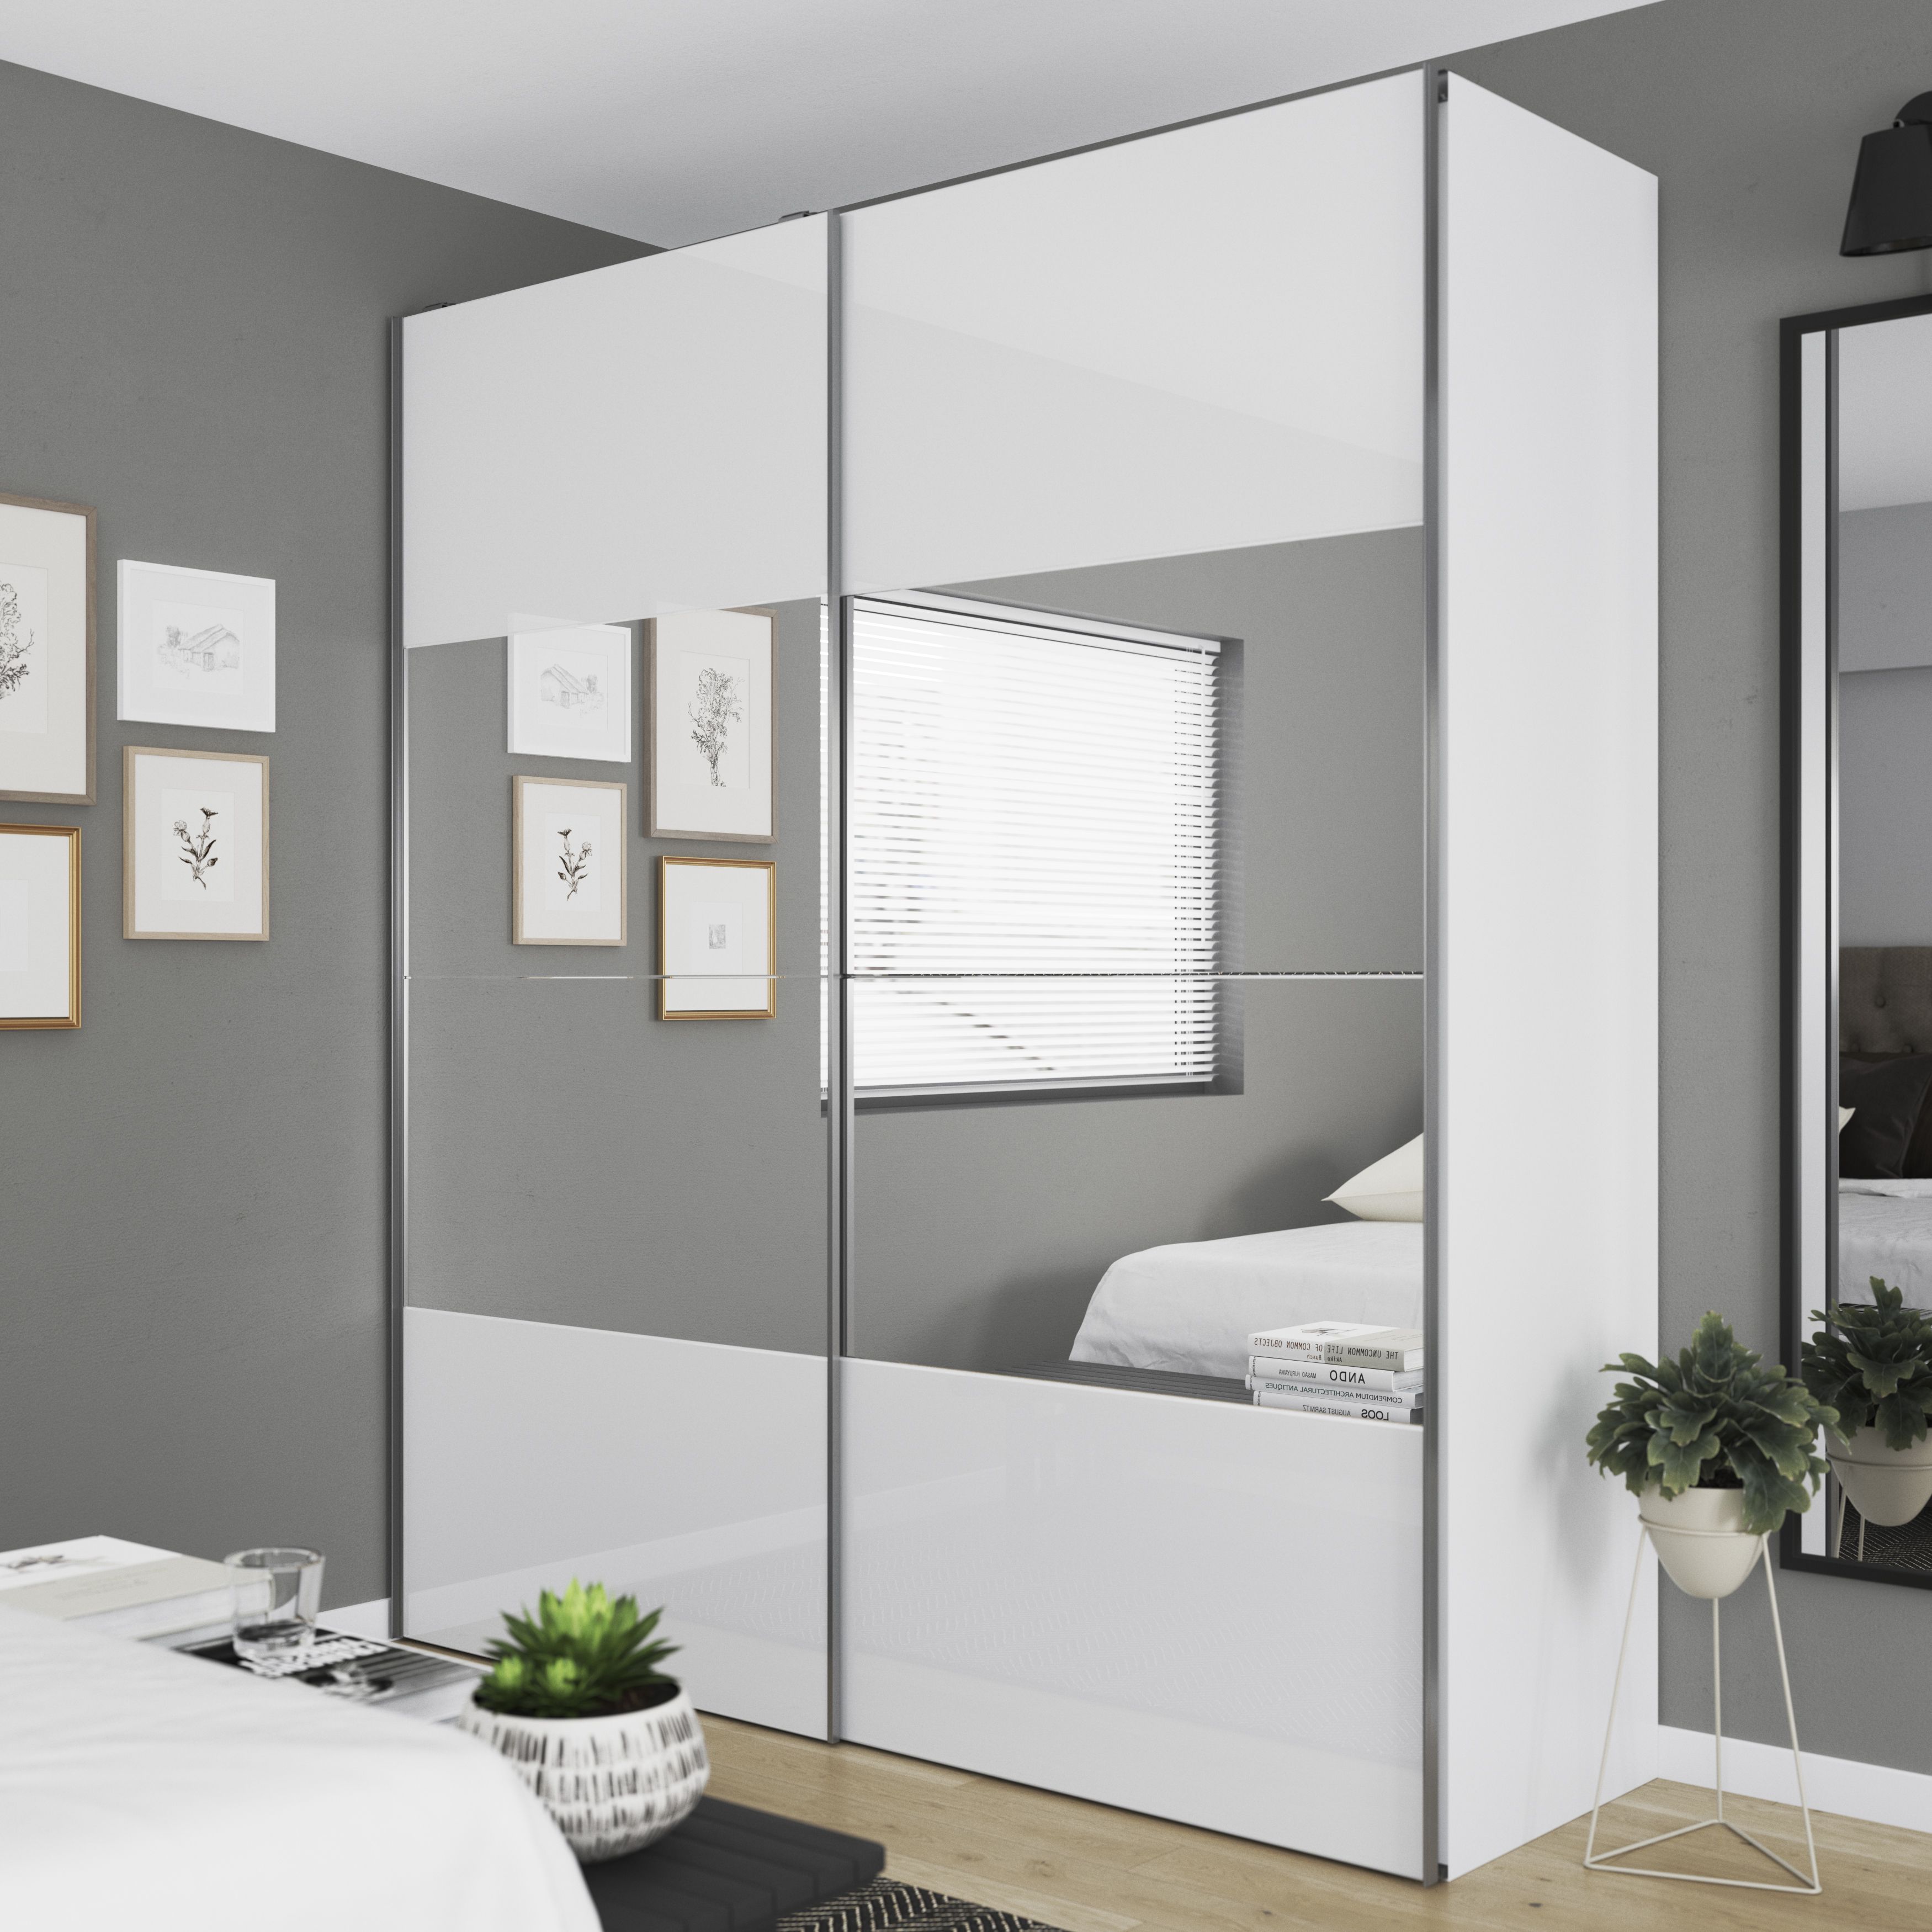 GoodHome Atomia Modern High gloss White Particle board Large Double Wardrobe (H)2250mm (W)2000mm (D)655mm